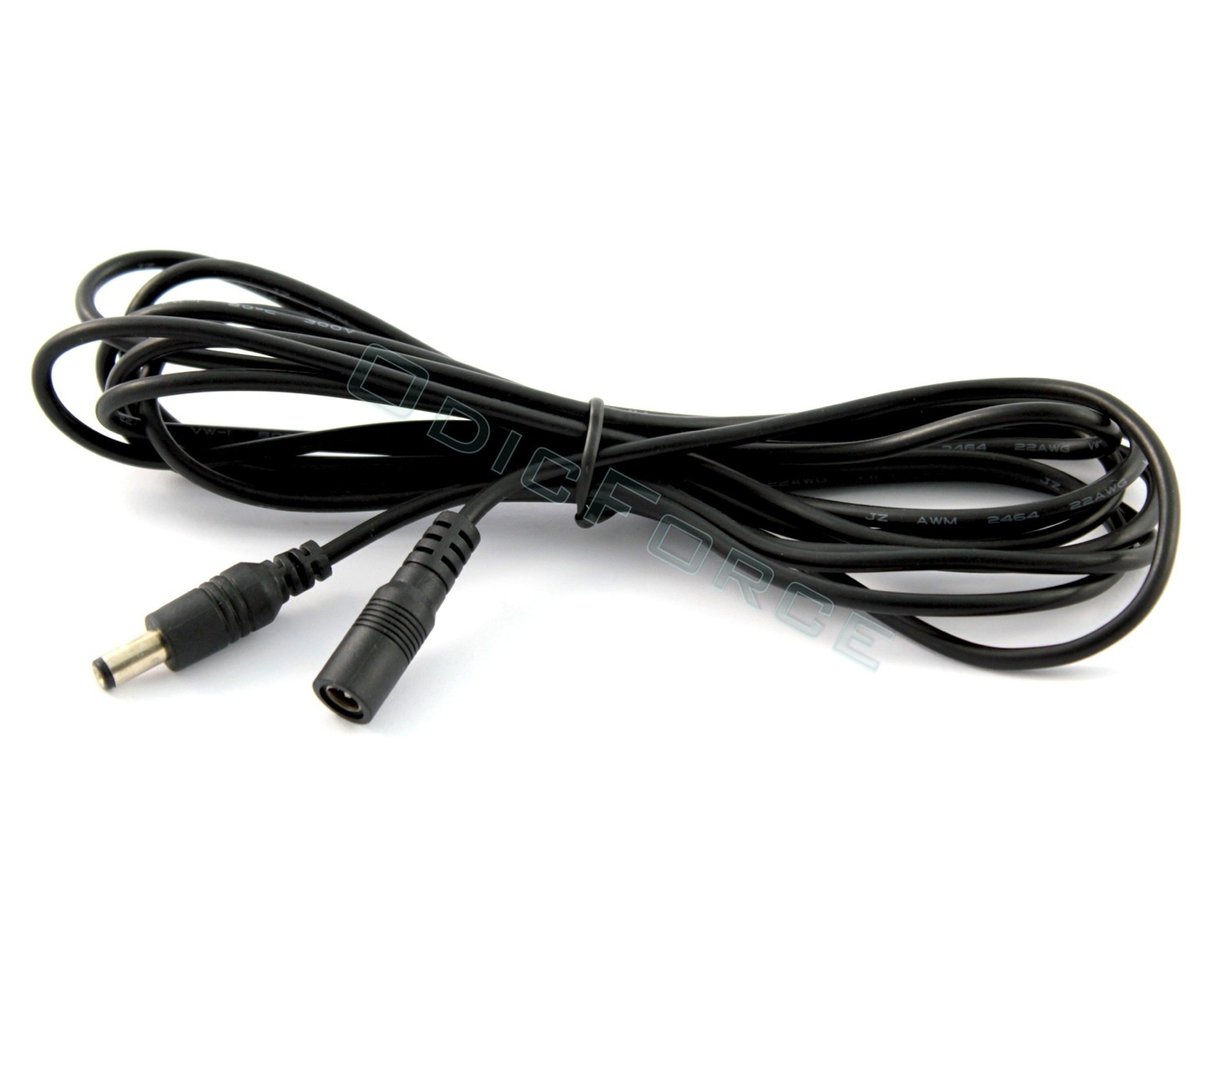 Power Extension Cable for 5.5mm x 2.1mm PSU (3.0M)